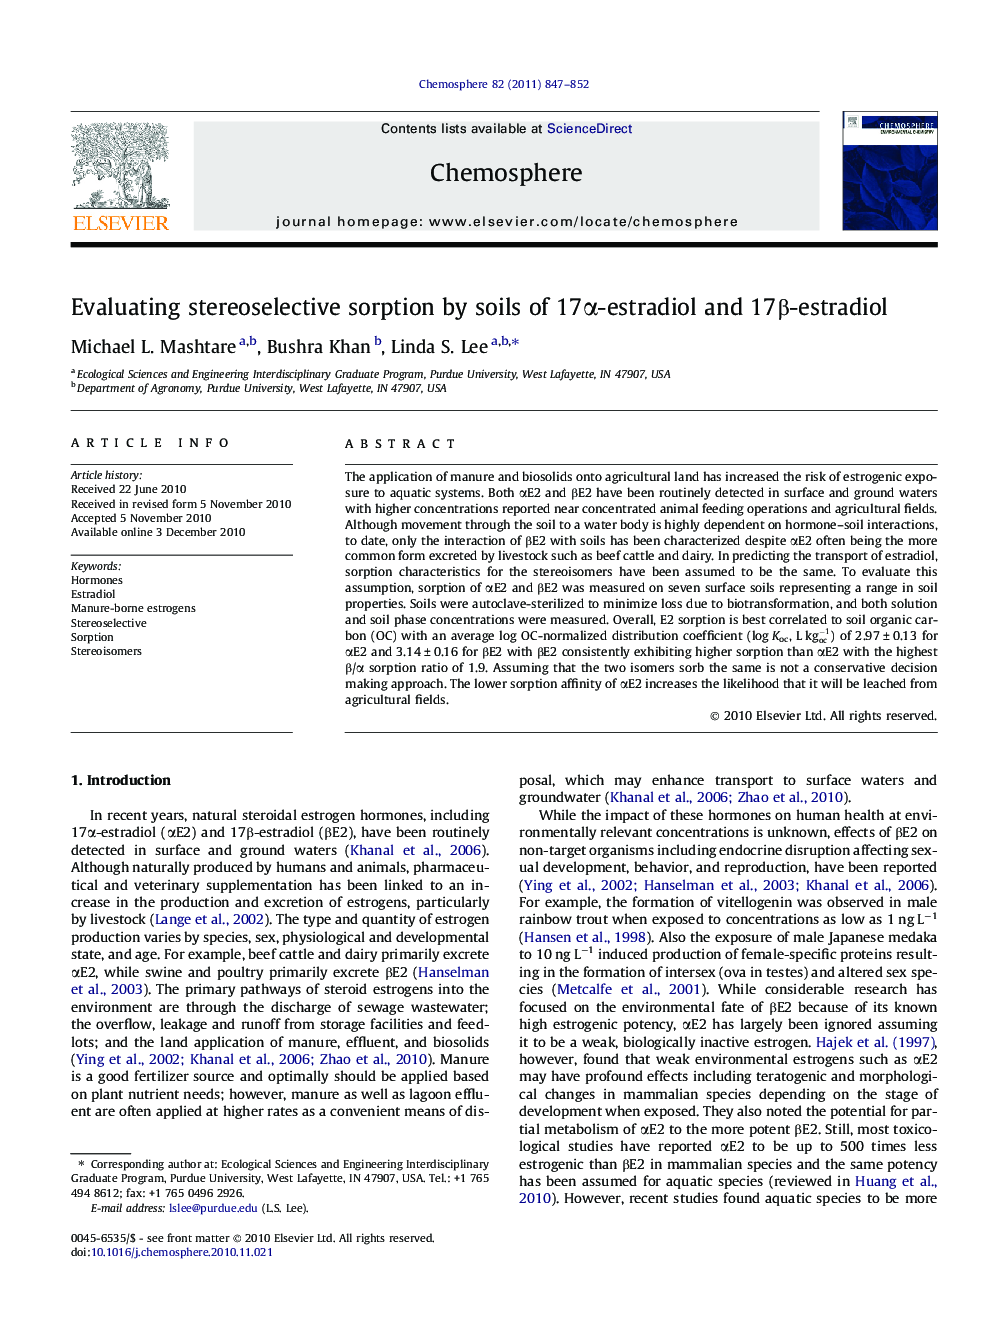 Evaluating stereoselective sorption by soils of 17Î±-estradiol and 17Î²-estradiol